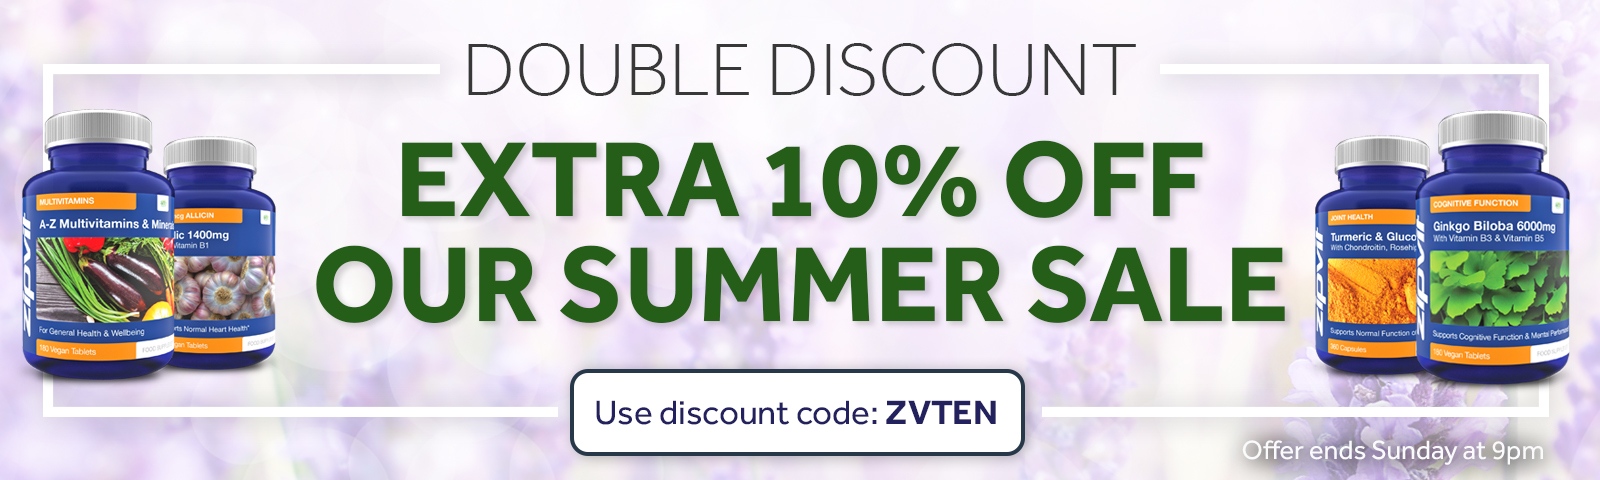 Double Discount - Extra 10% Off Sale Prices